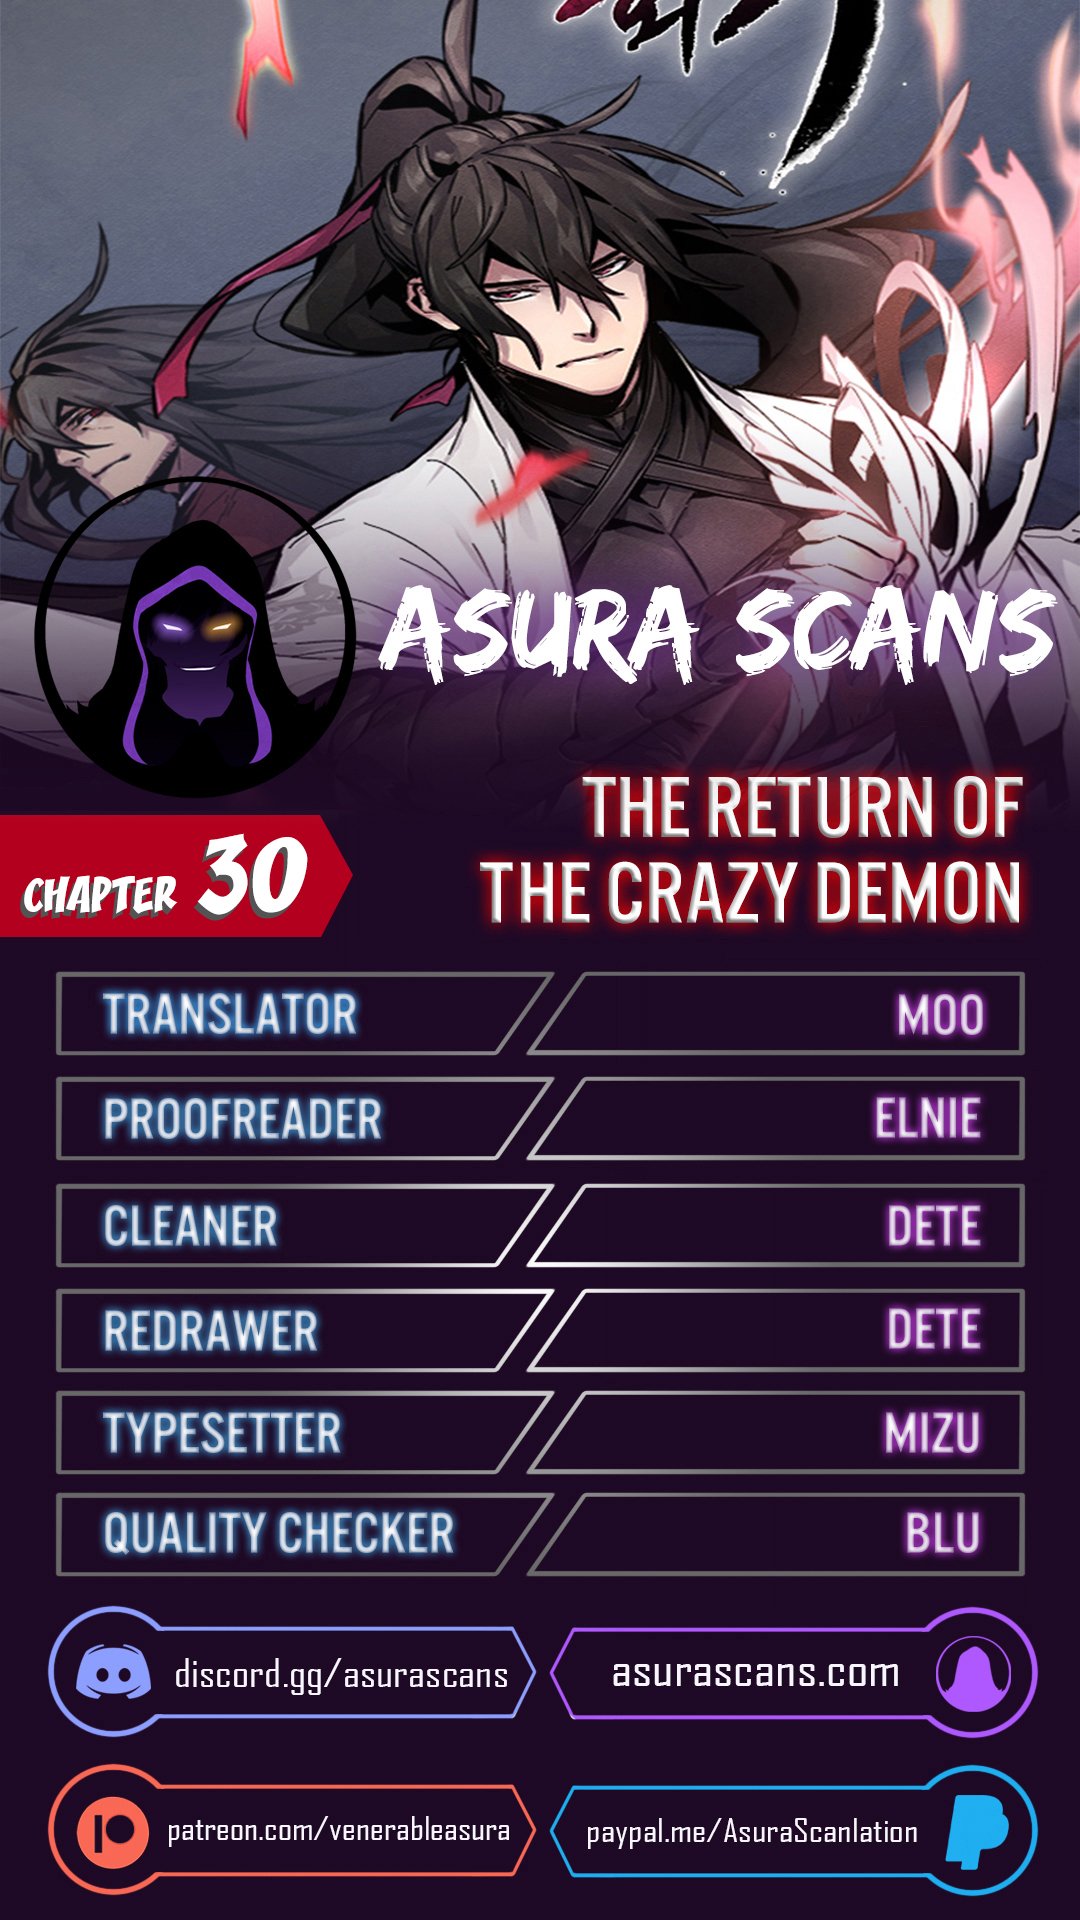 The Return of the Crazy Demon - Chapter 18571 - Image 1